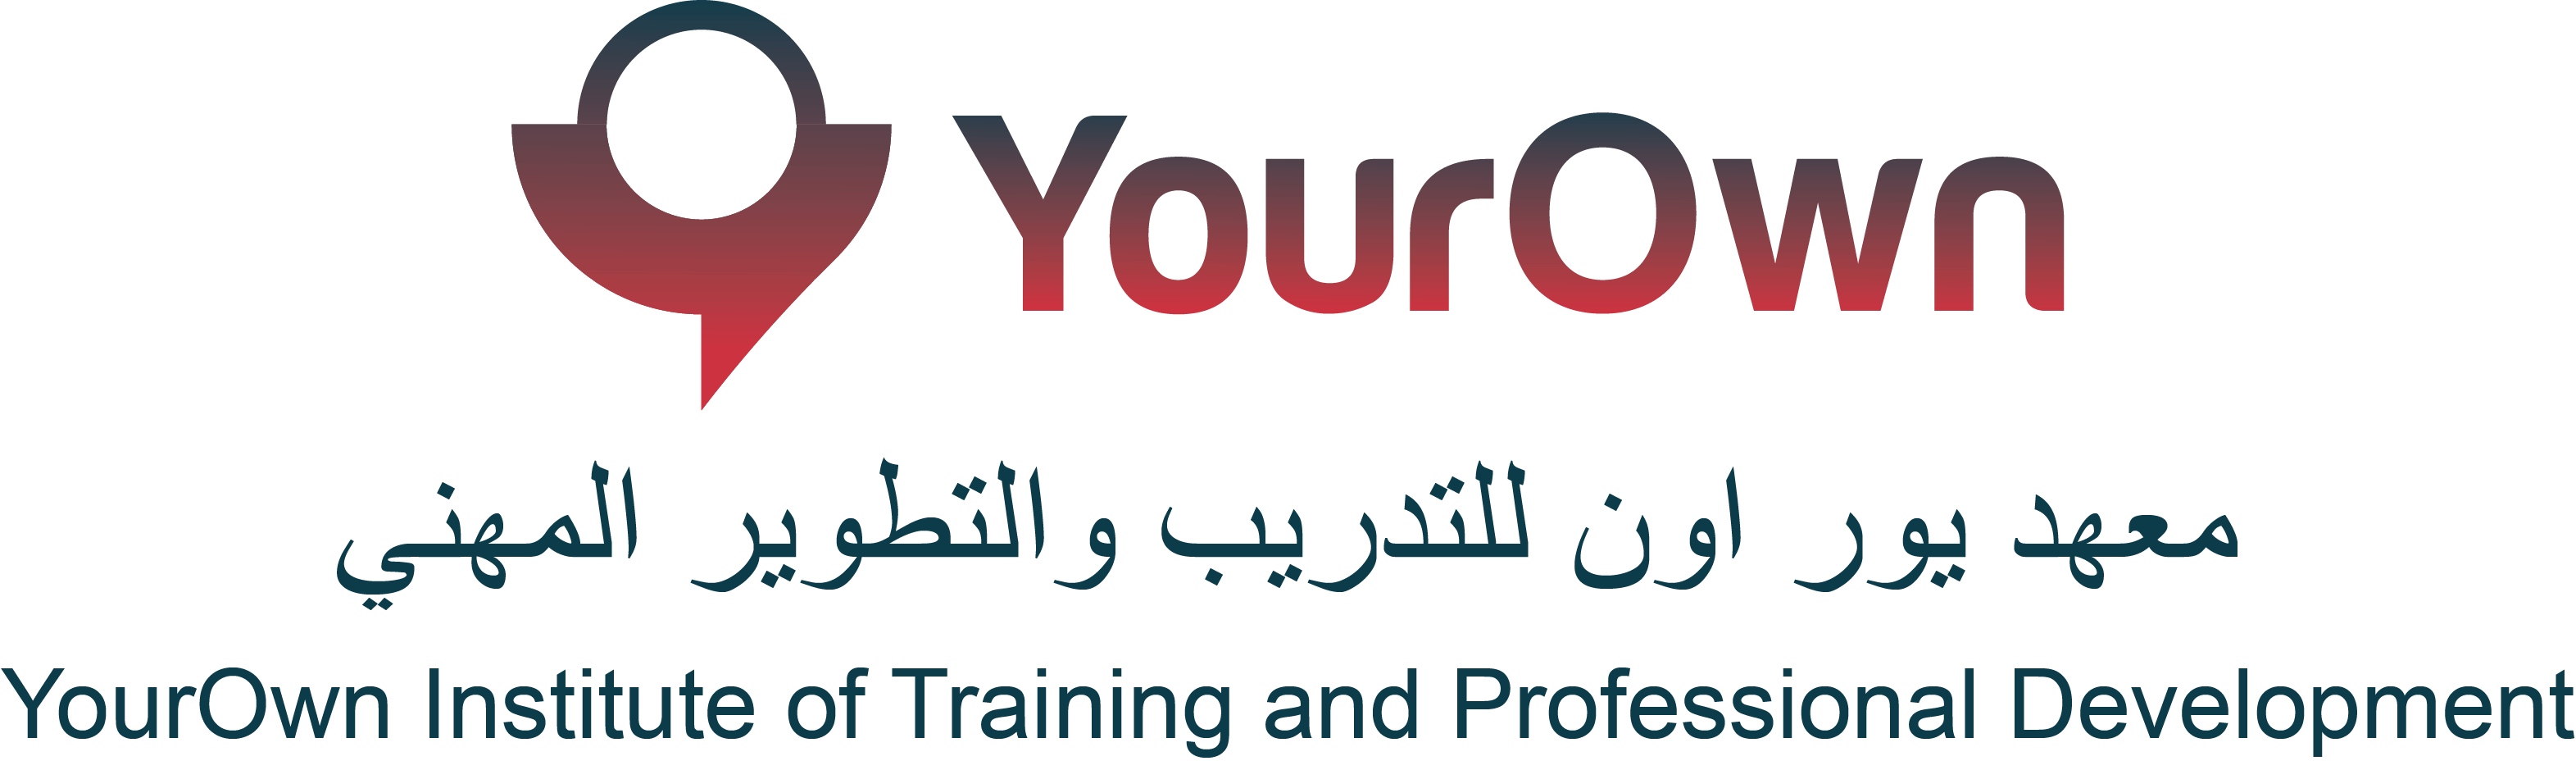 YourOwn Institute of Training and Professional Development Logo